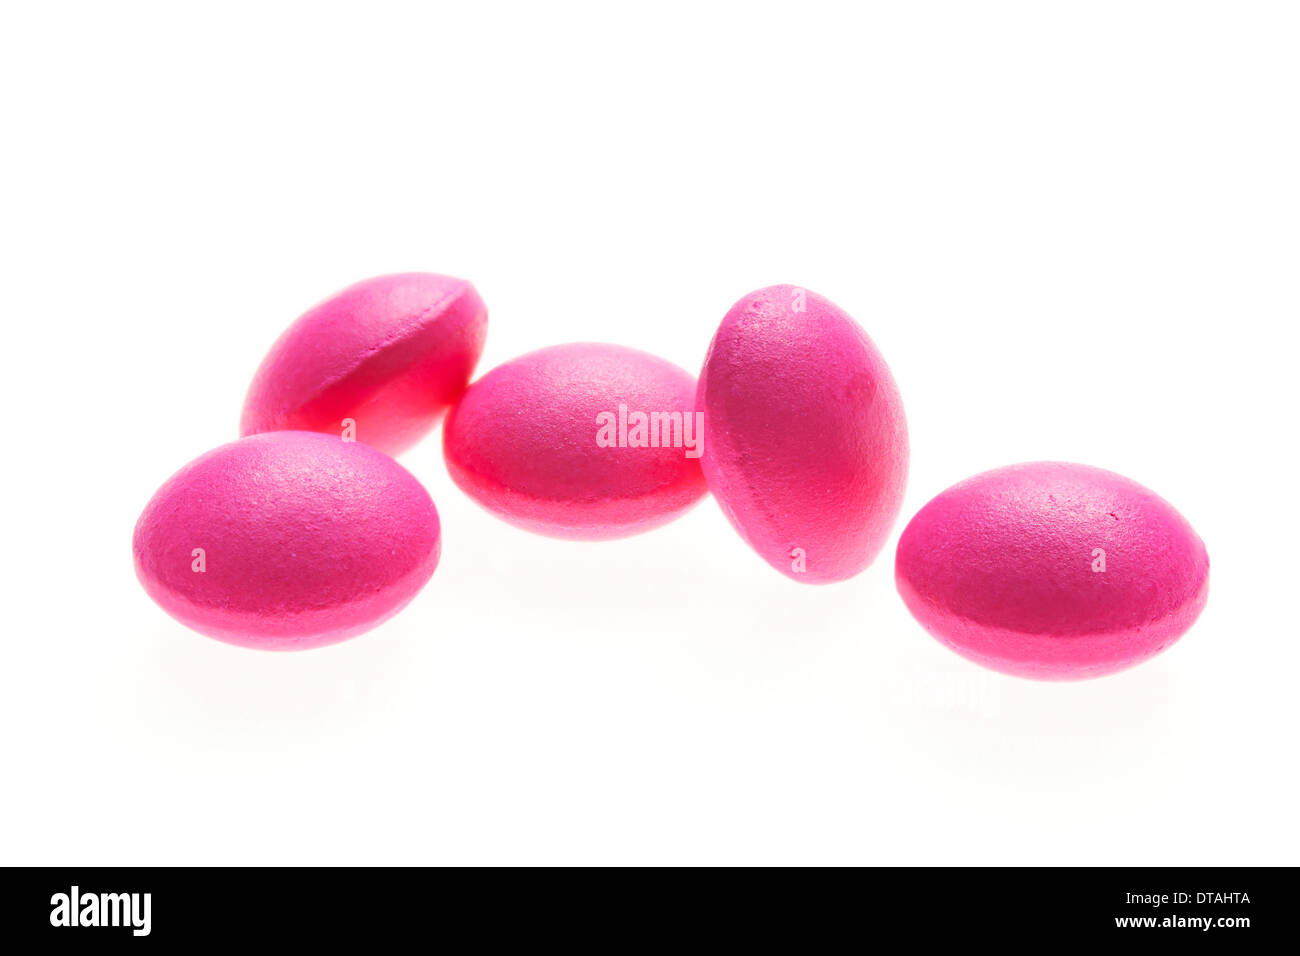 Pink round ibuprofen 200mg tablets on a white background Stock Photo